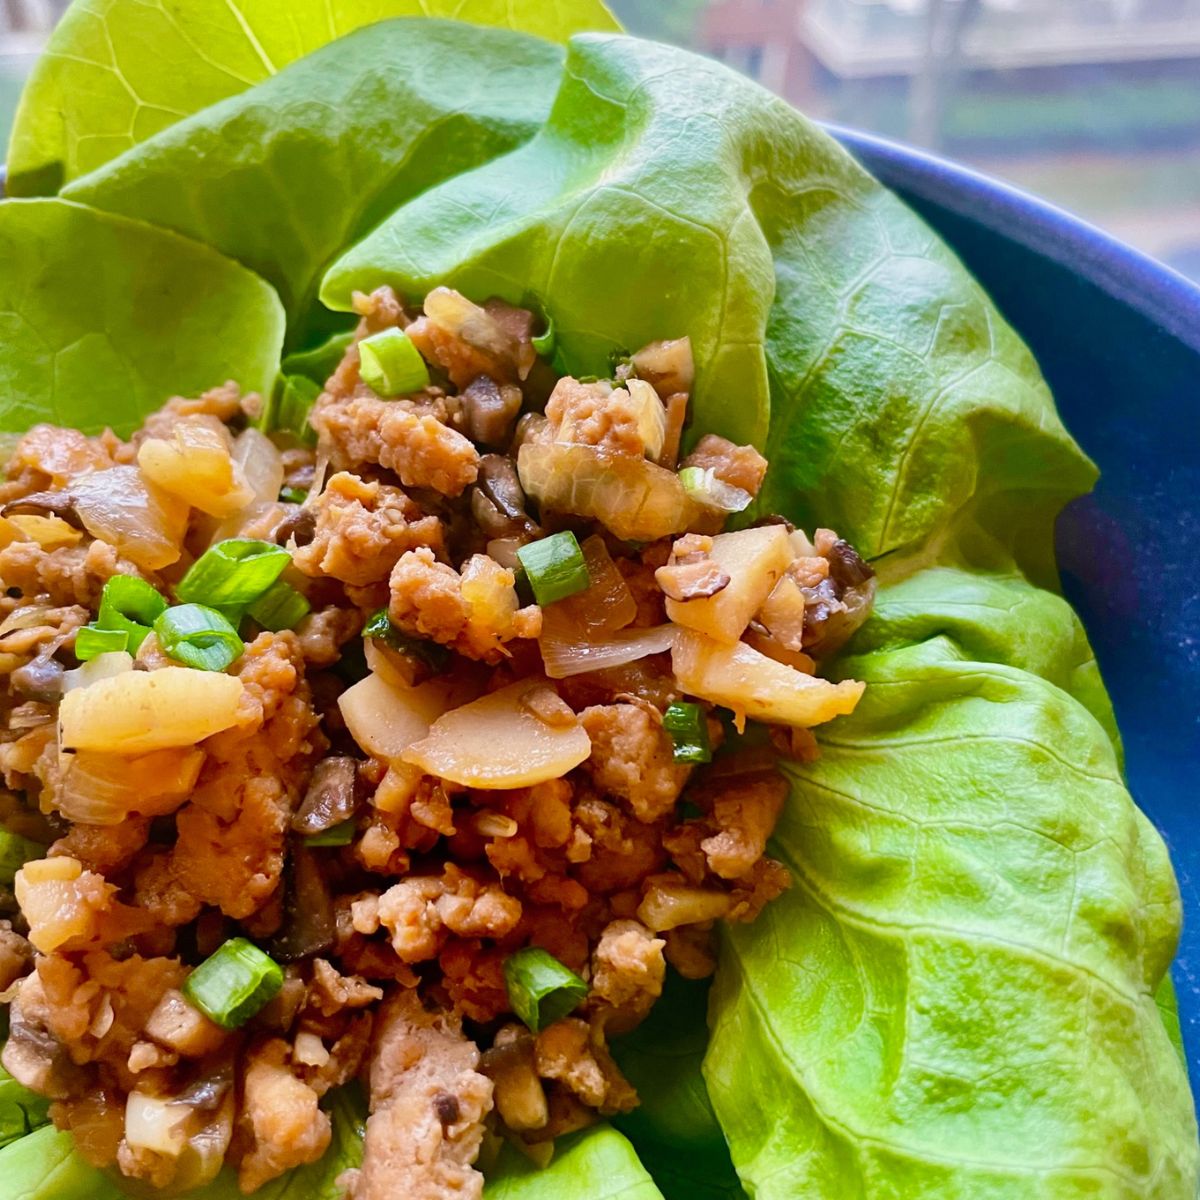 PF chang's chicken lettuce wraps